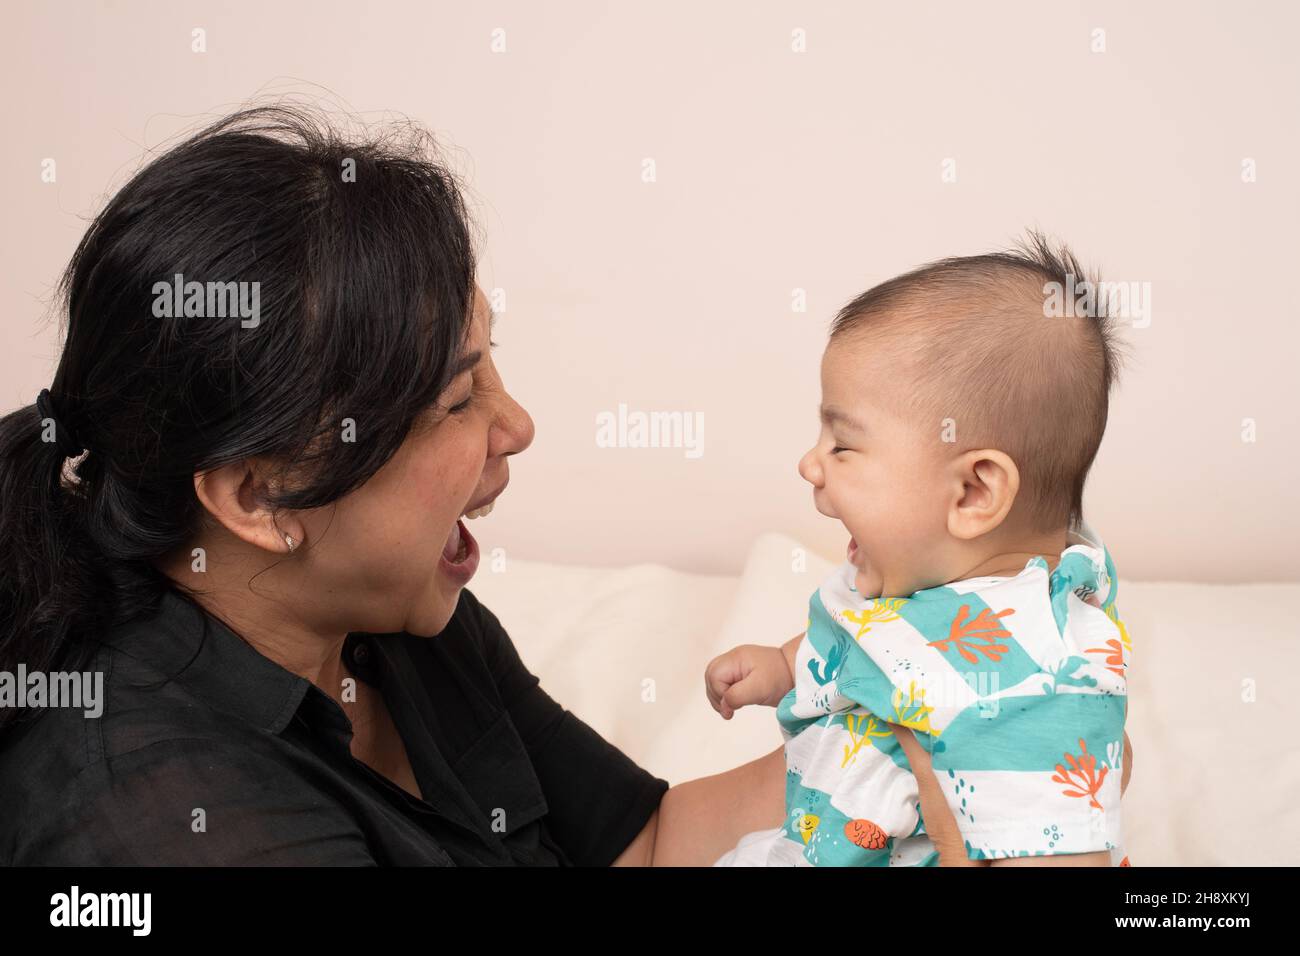 3 month old baby boy interaction with mother matching expressions, laughing, mouths open Stock Photo